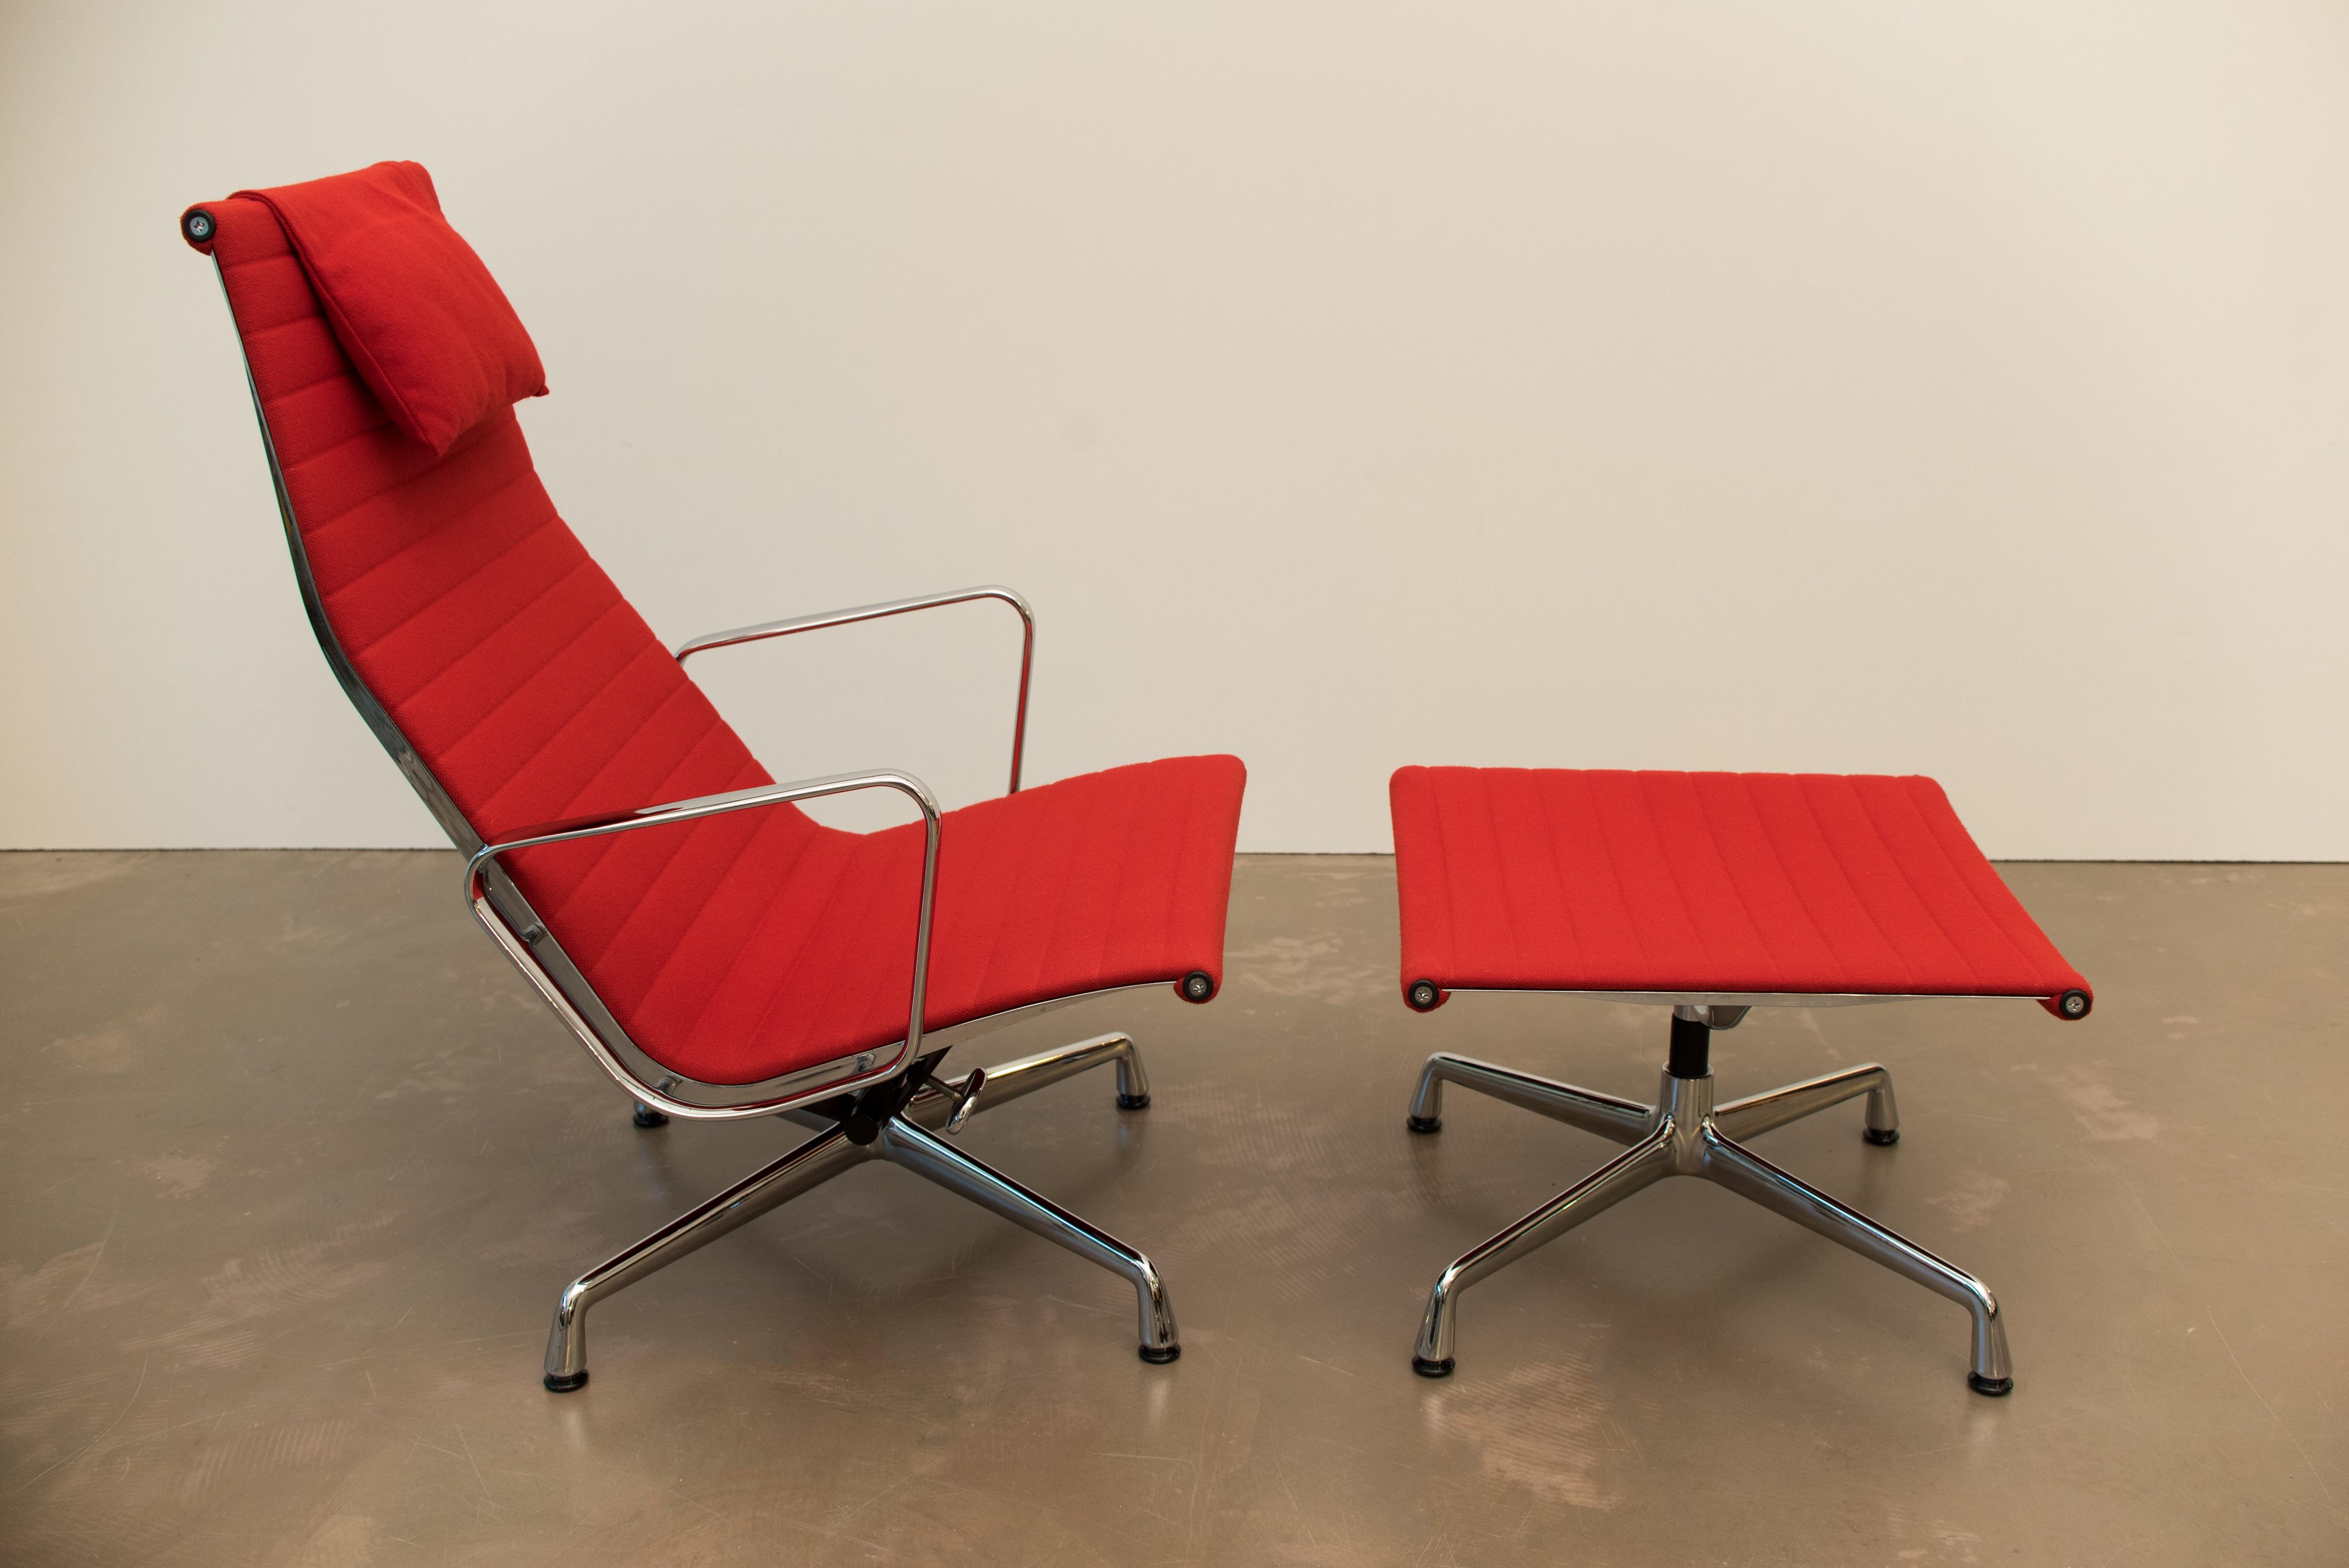 Vintage EA 124 aluminium swivel chair with ottoman was designed by Charles and Ray Eames and was produced by Vitra in the 1960s.